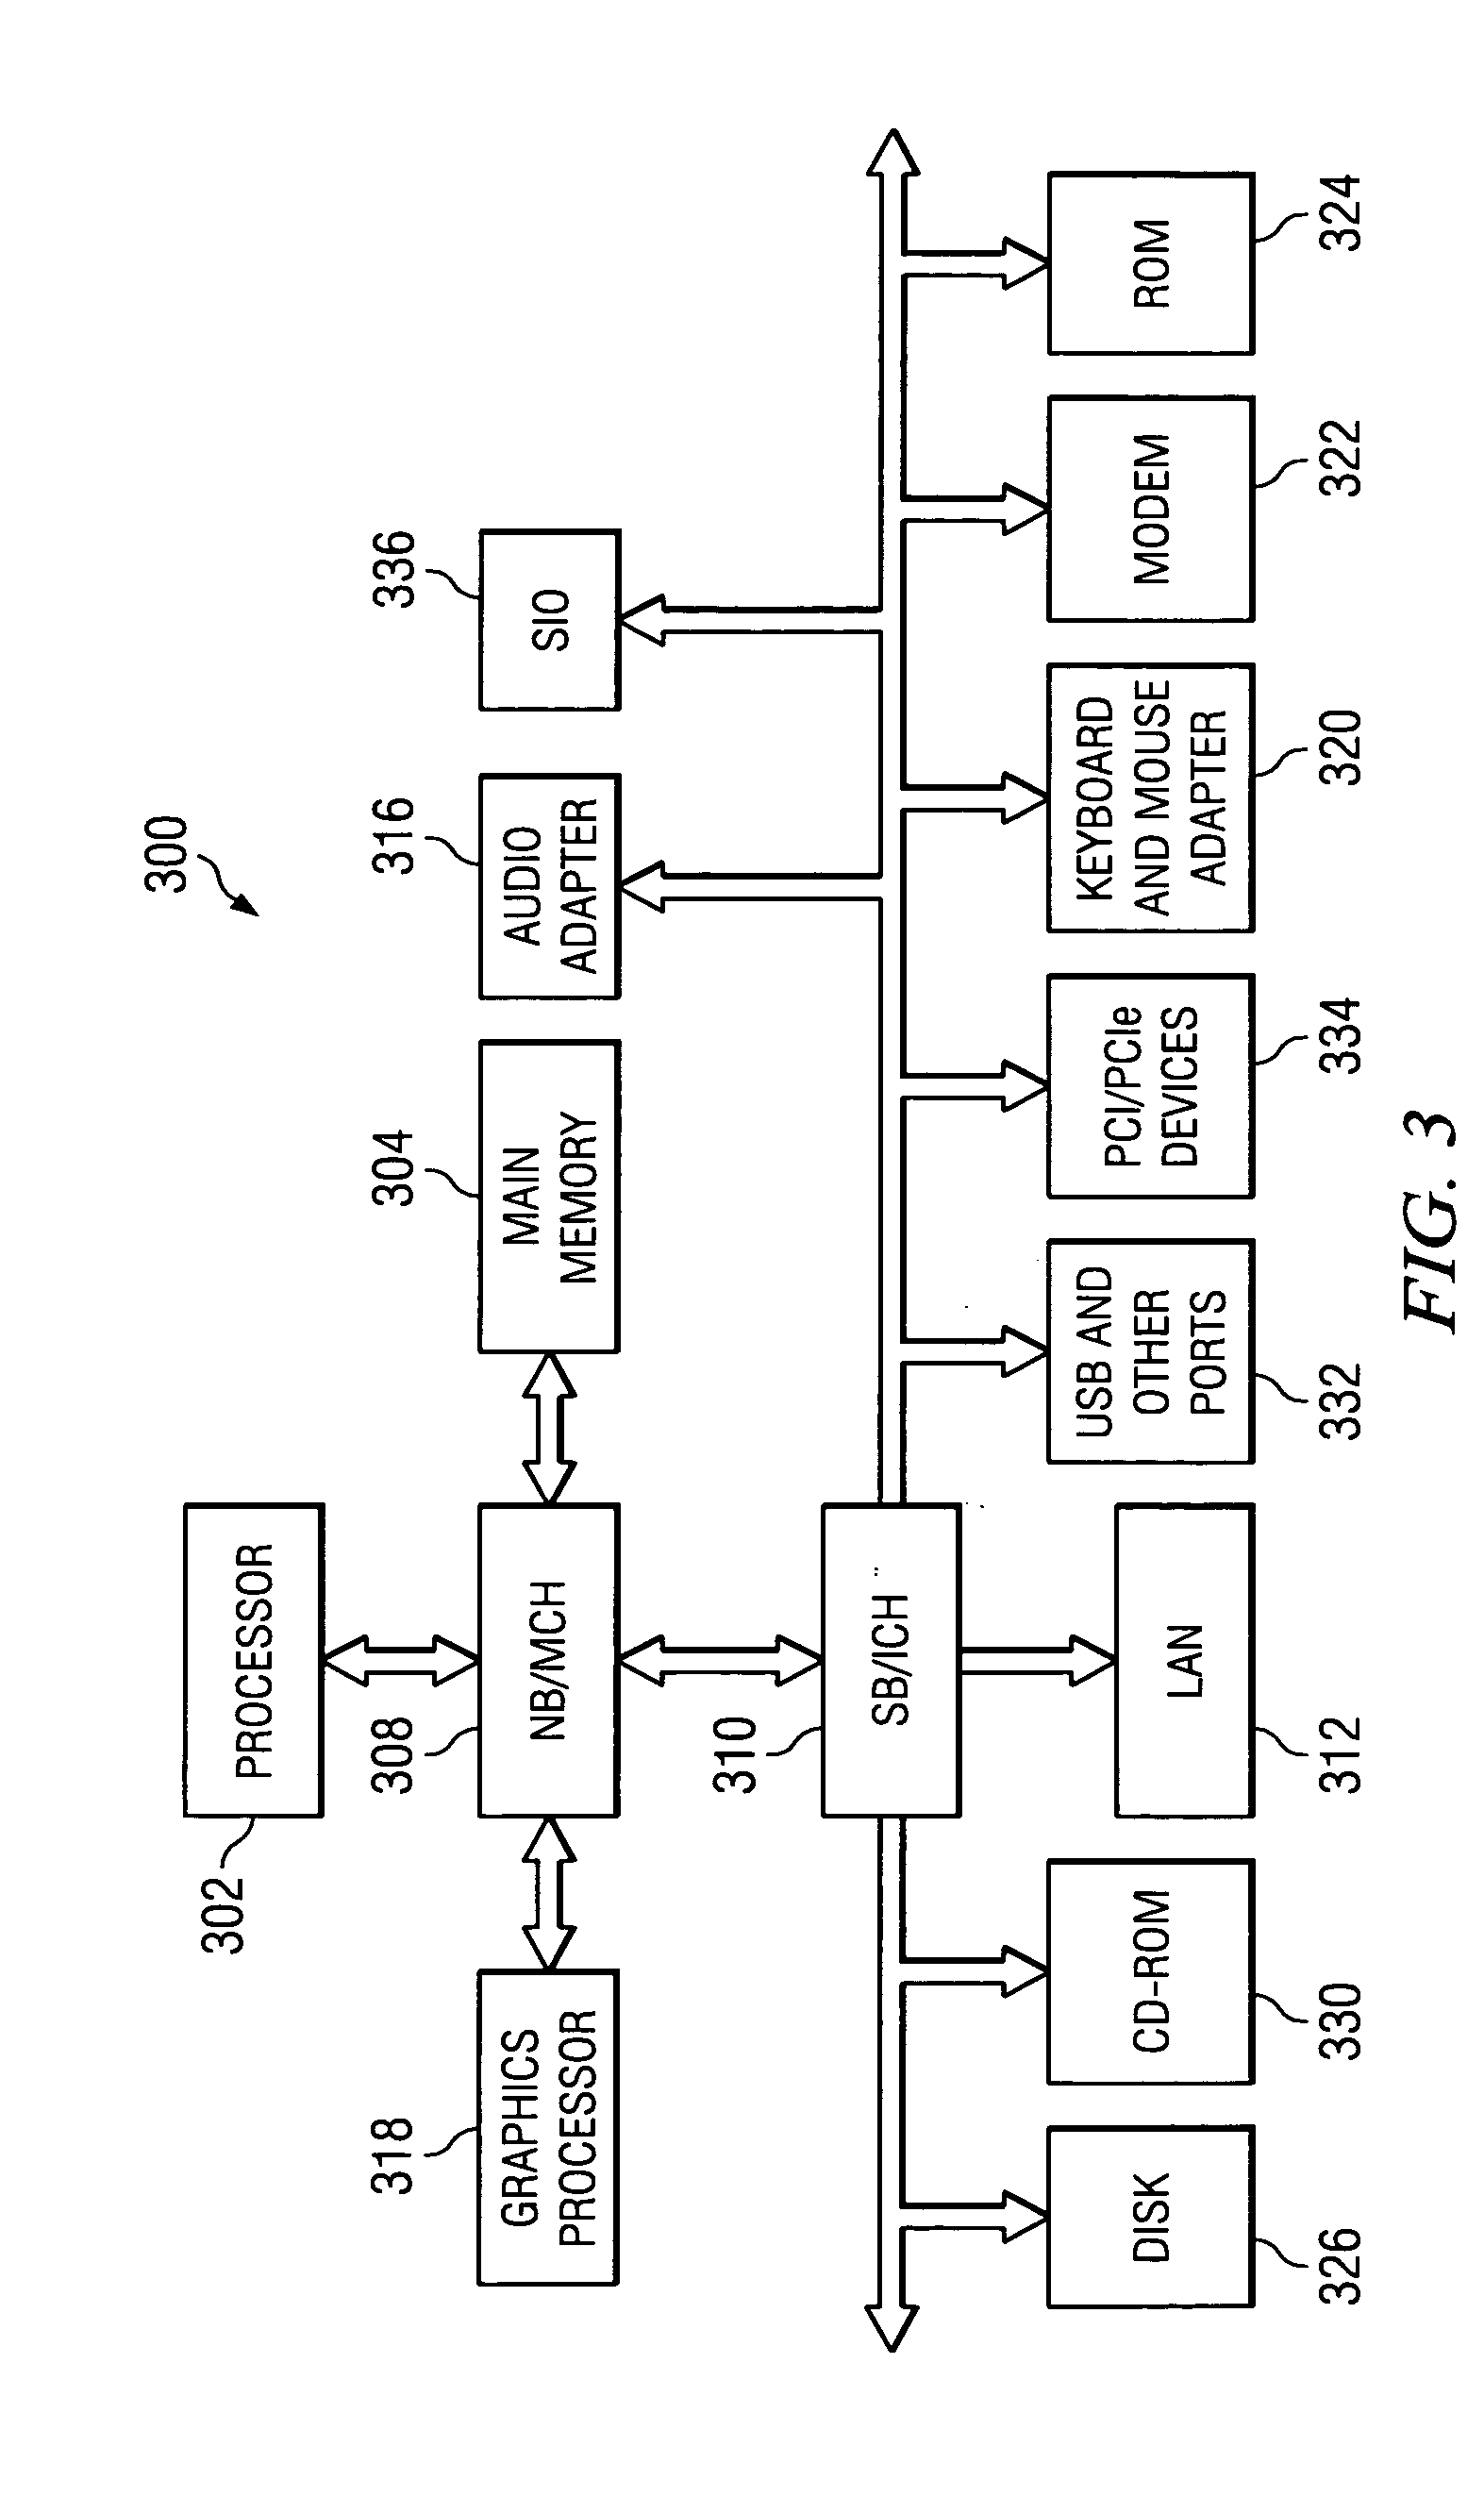 Method and system for dynamic security checking of heterogeneous database environments